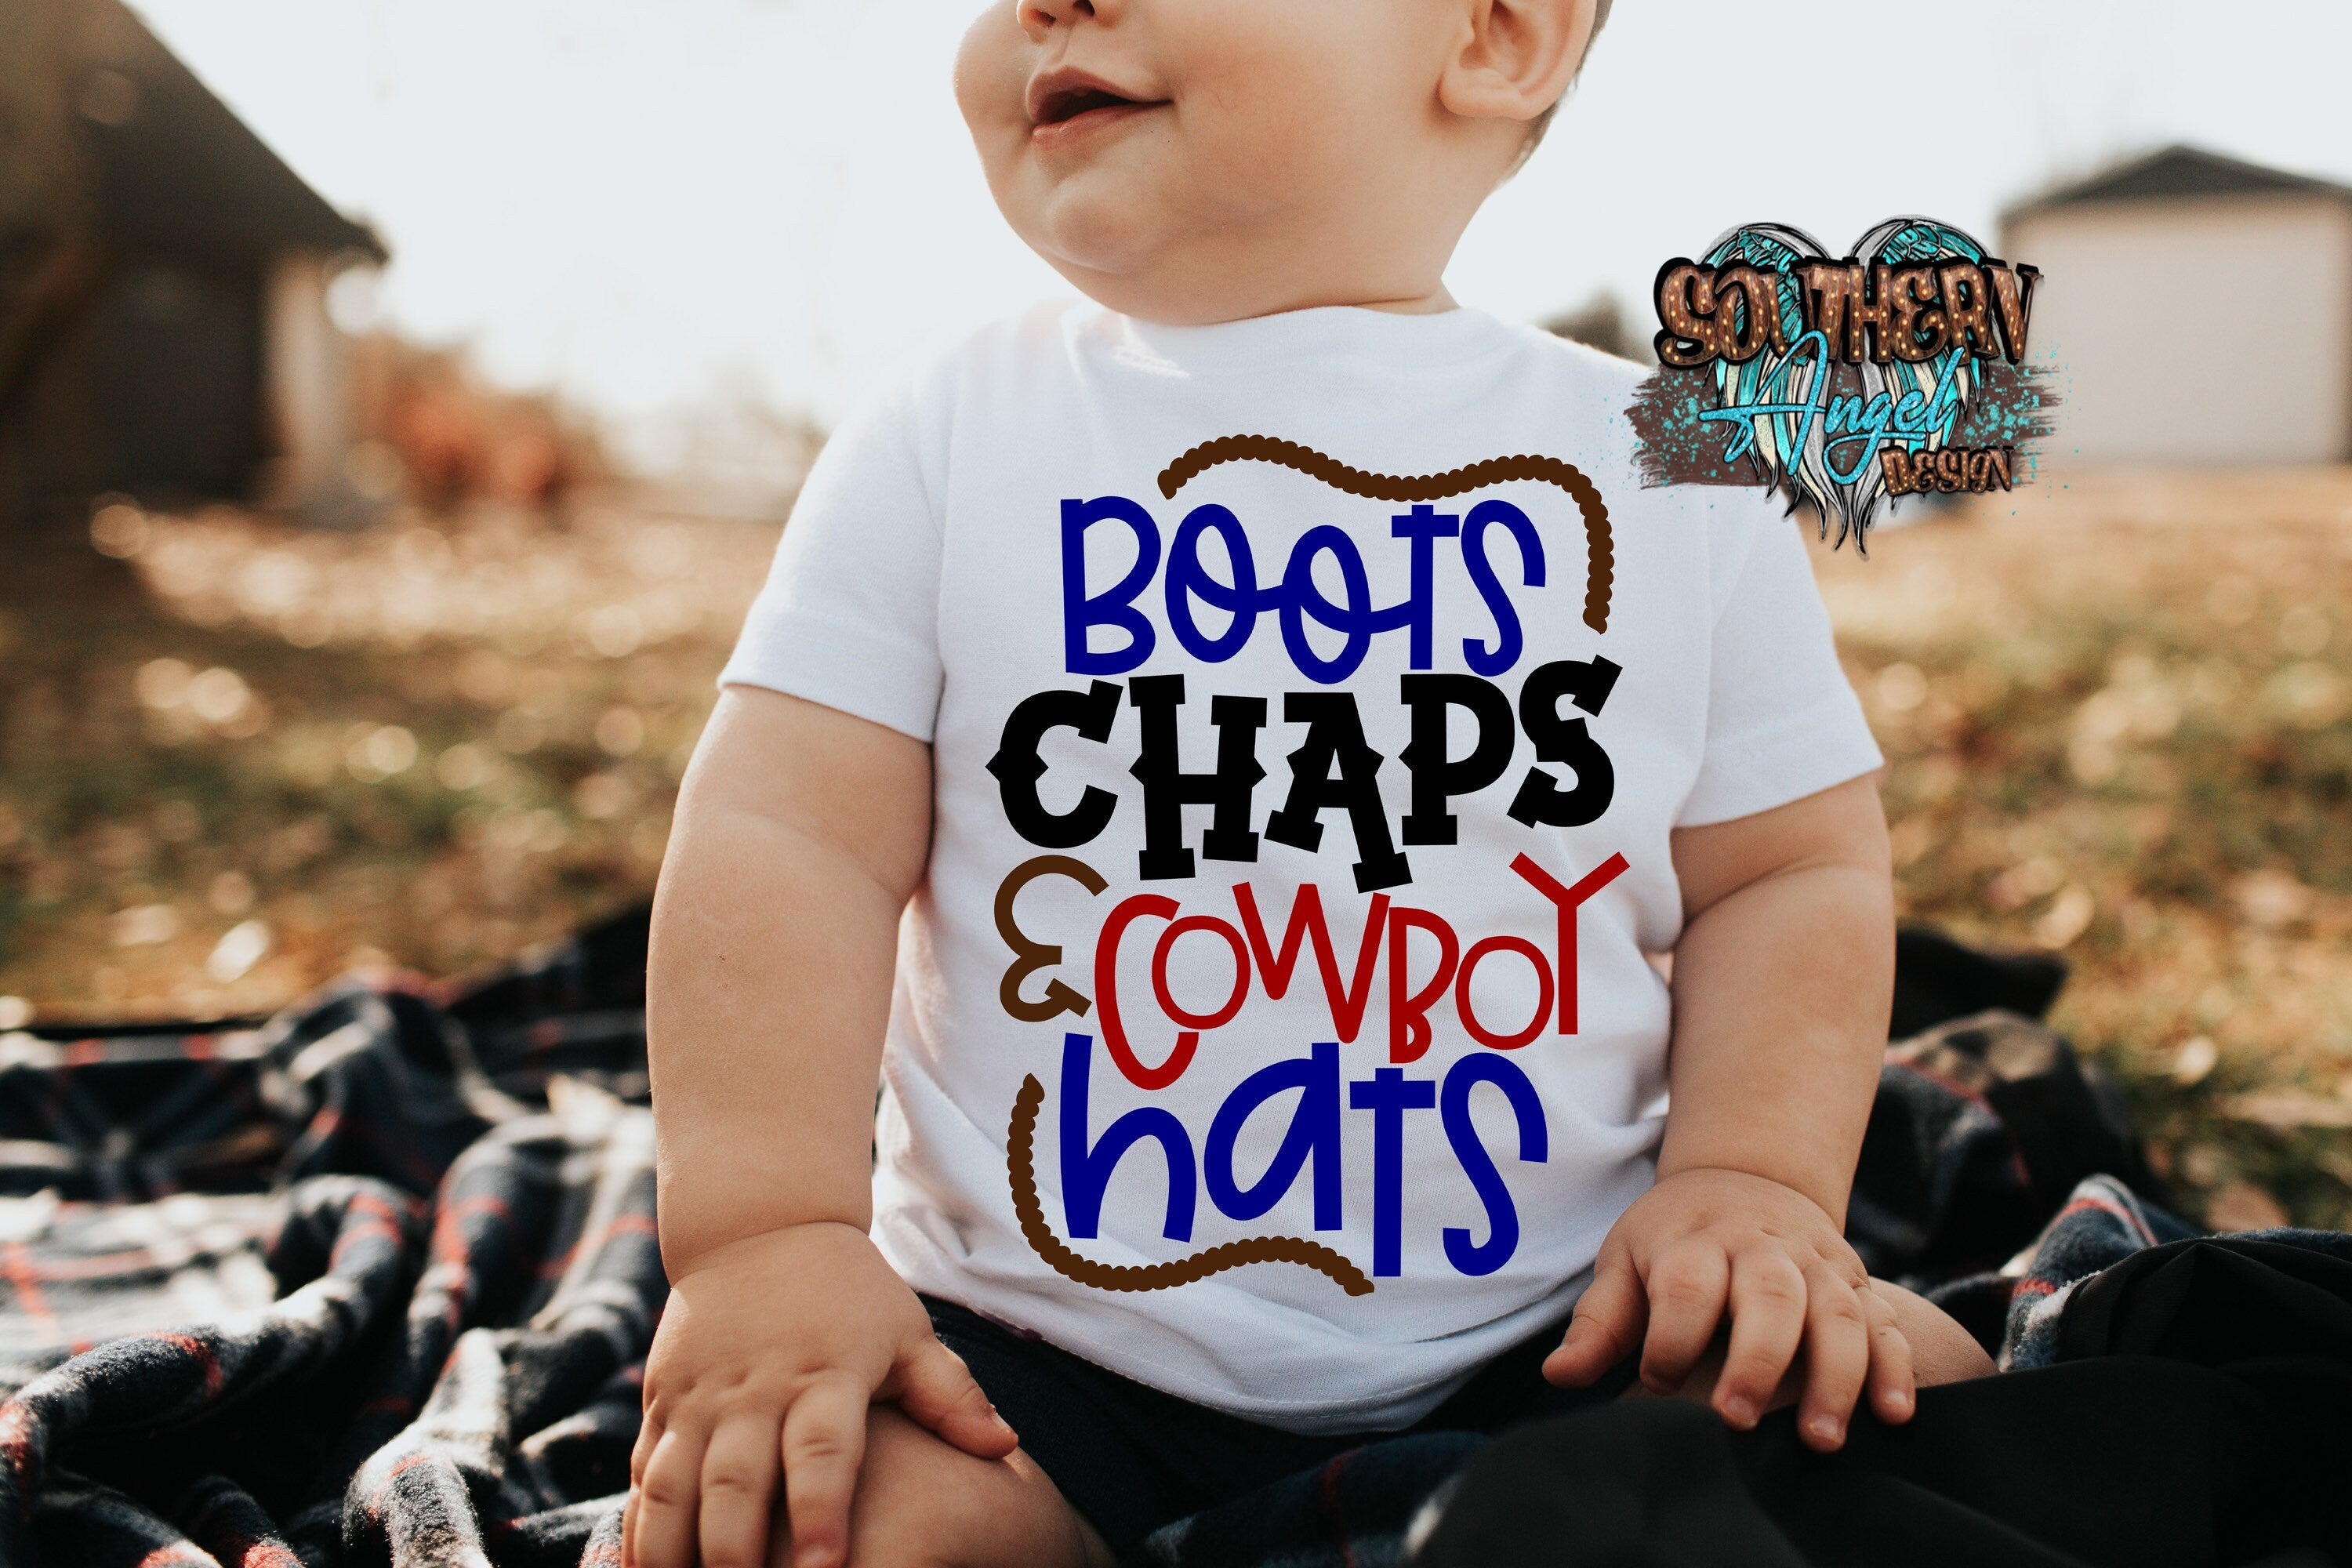 Boots Chaps And Cowboy Hats bodysuit | Little cowboy outfit | Country boy shirt | Future cowboy | Baby shower | Cowboy in town